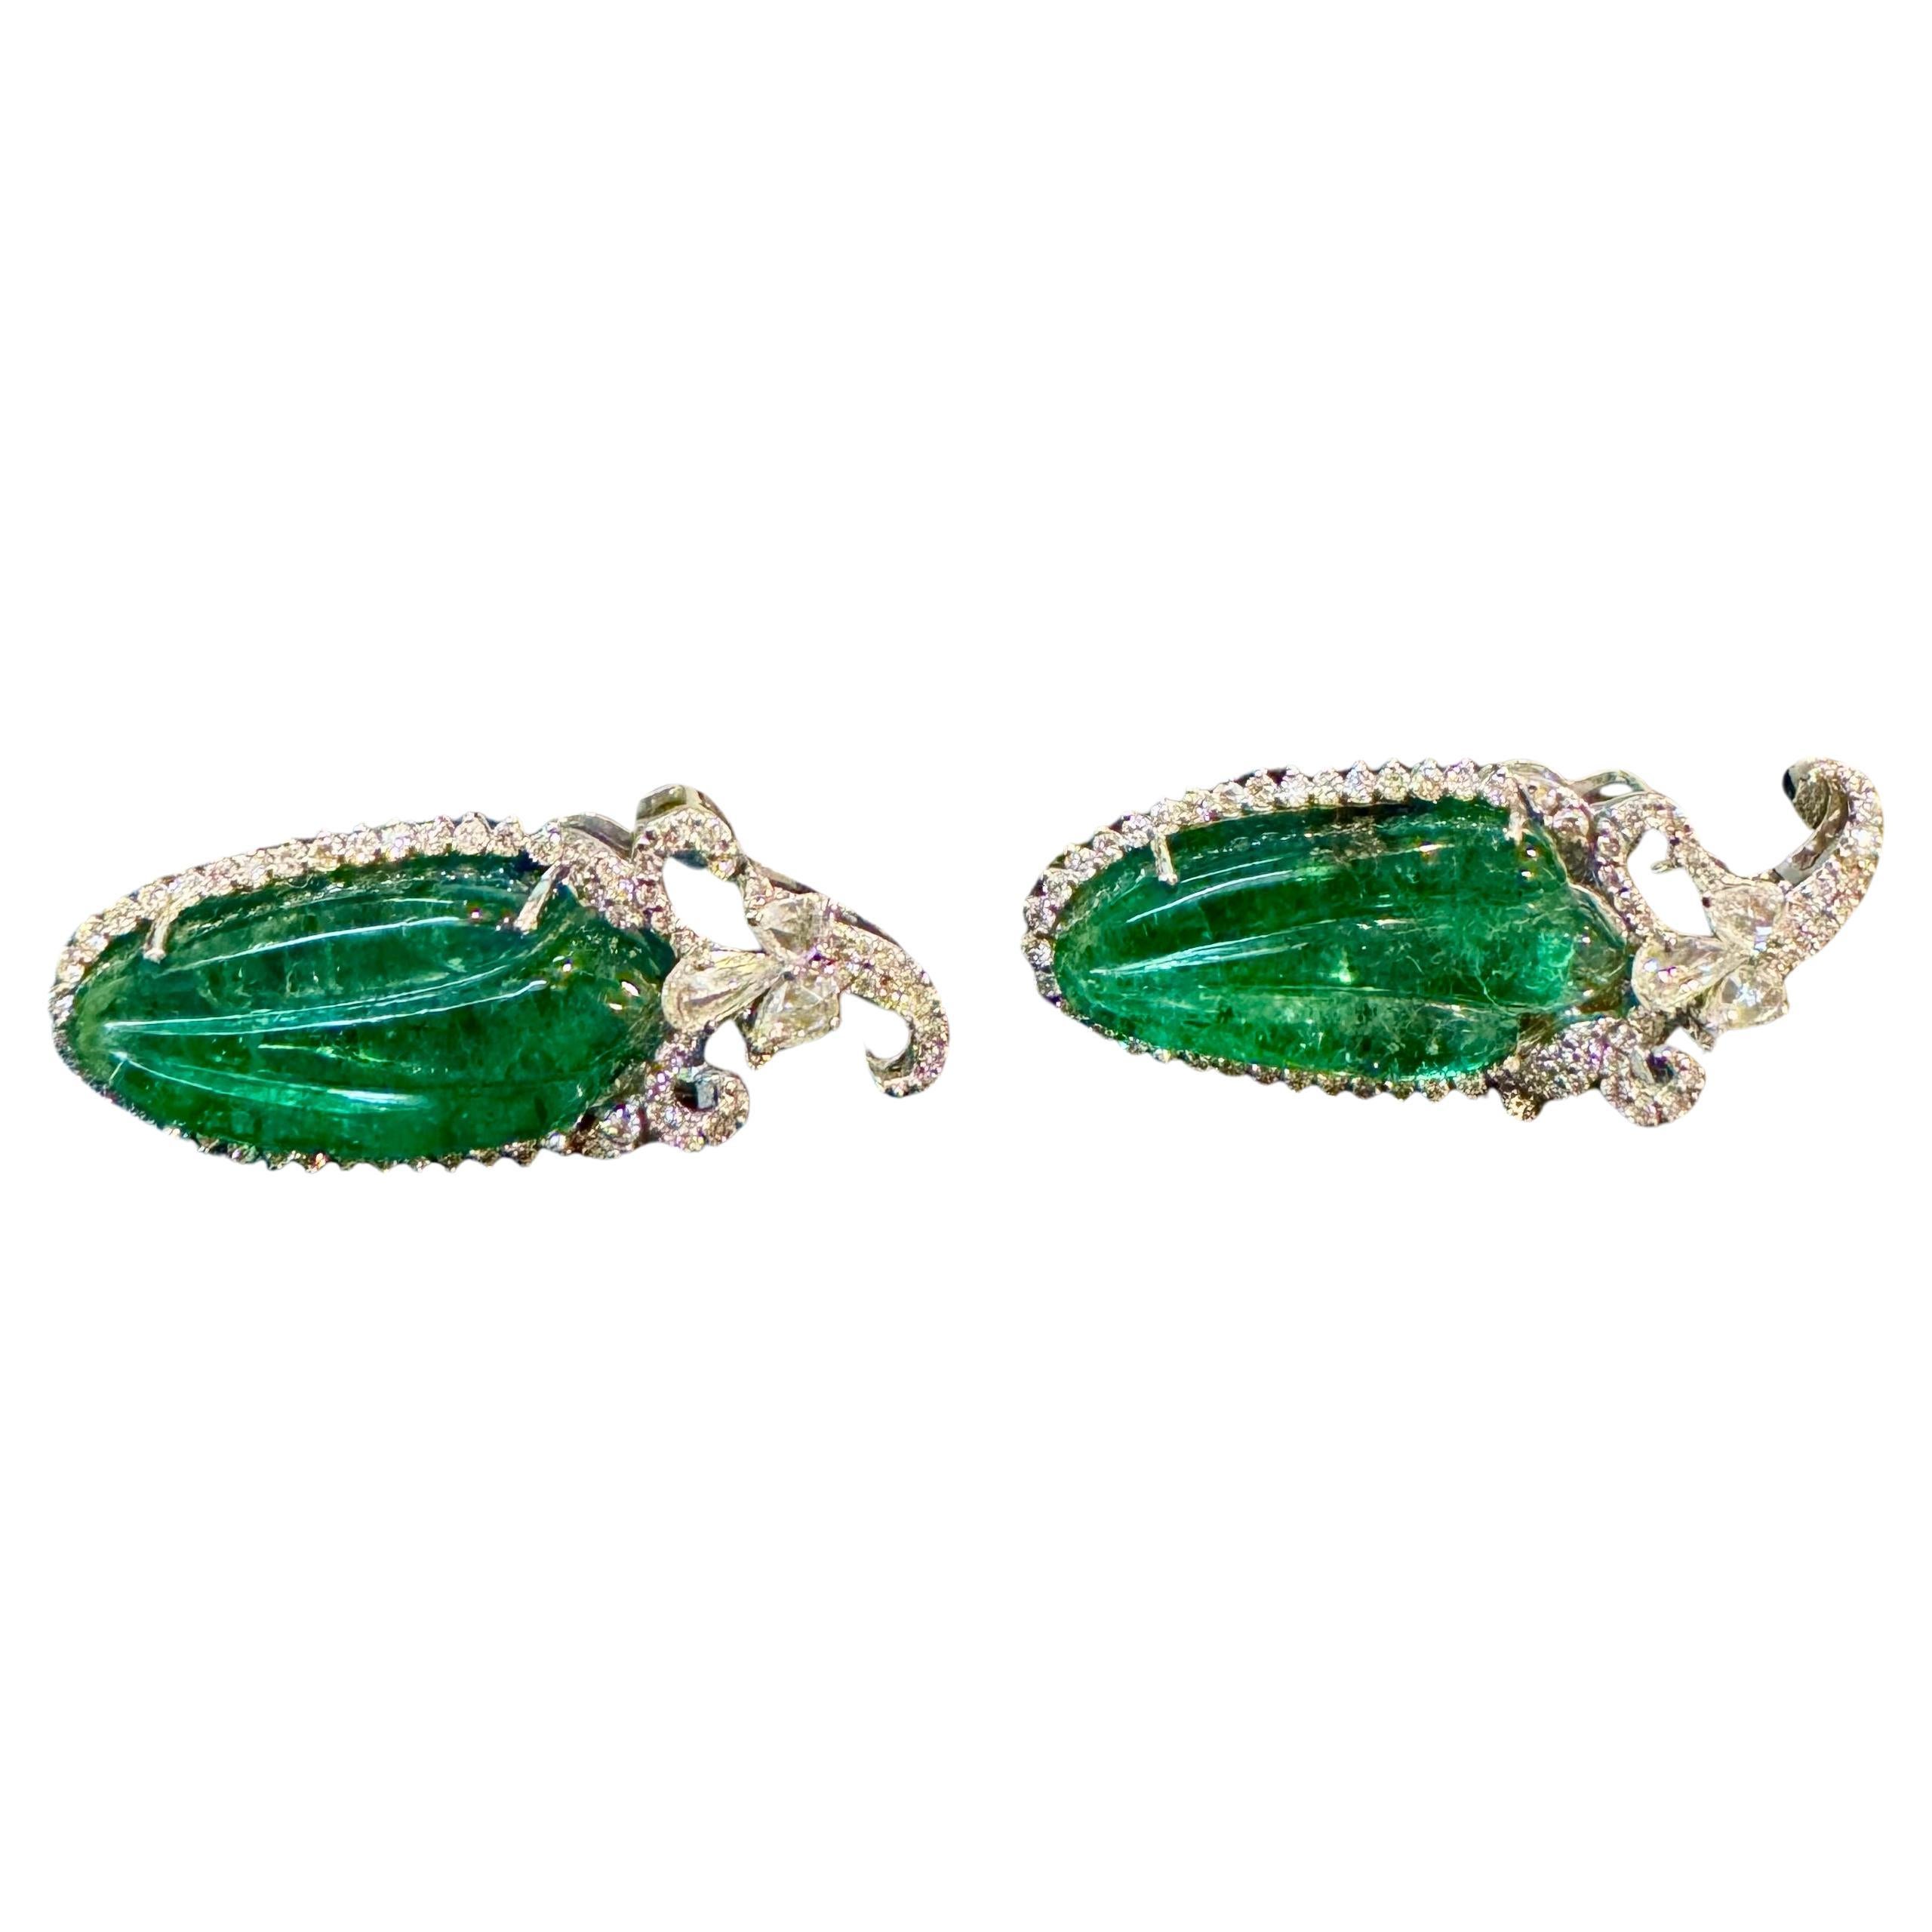 22 Ct Carved Emerald & 2 Ct Diamond Earrings
Emerald Diamond Post Earrings 18 Karat White Gold
Two fine carved leaf emeralds of total 21.90 ct exact known weight. Emeralds are surrounded by Brilliant cut round diamonds. There are three rose cut pear